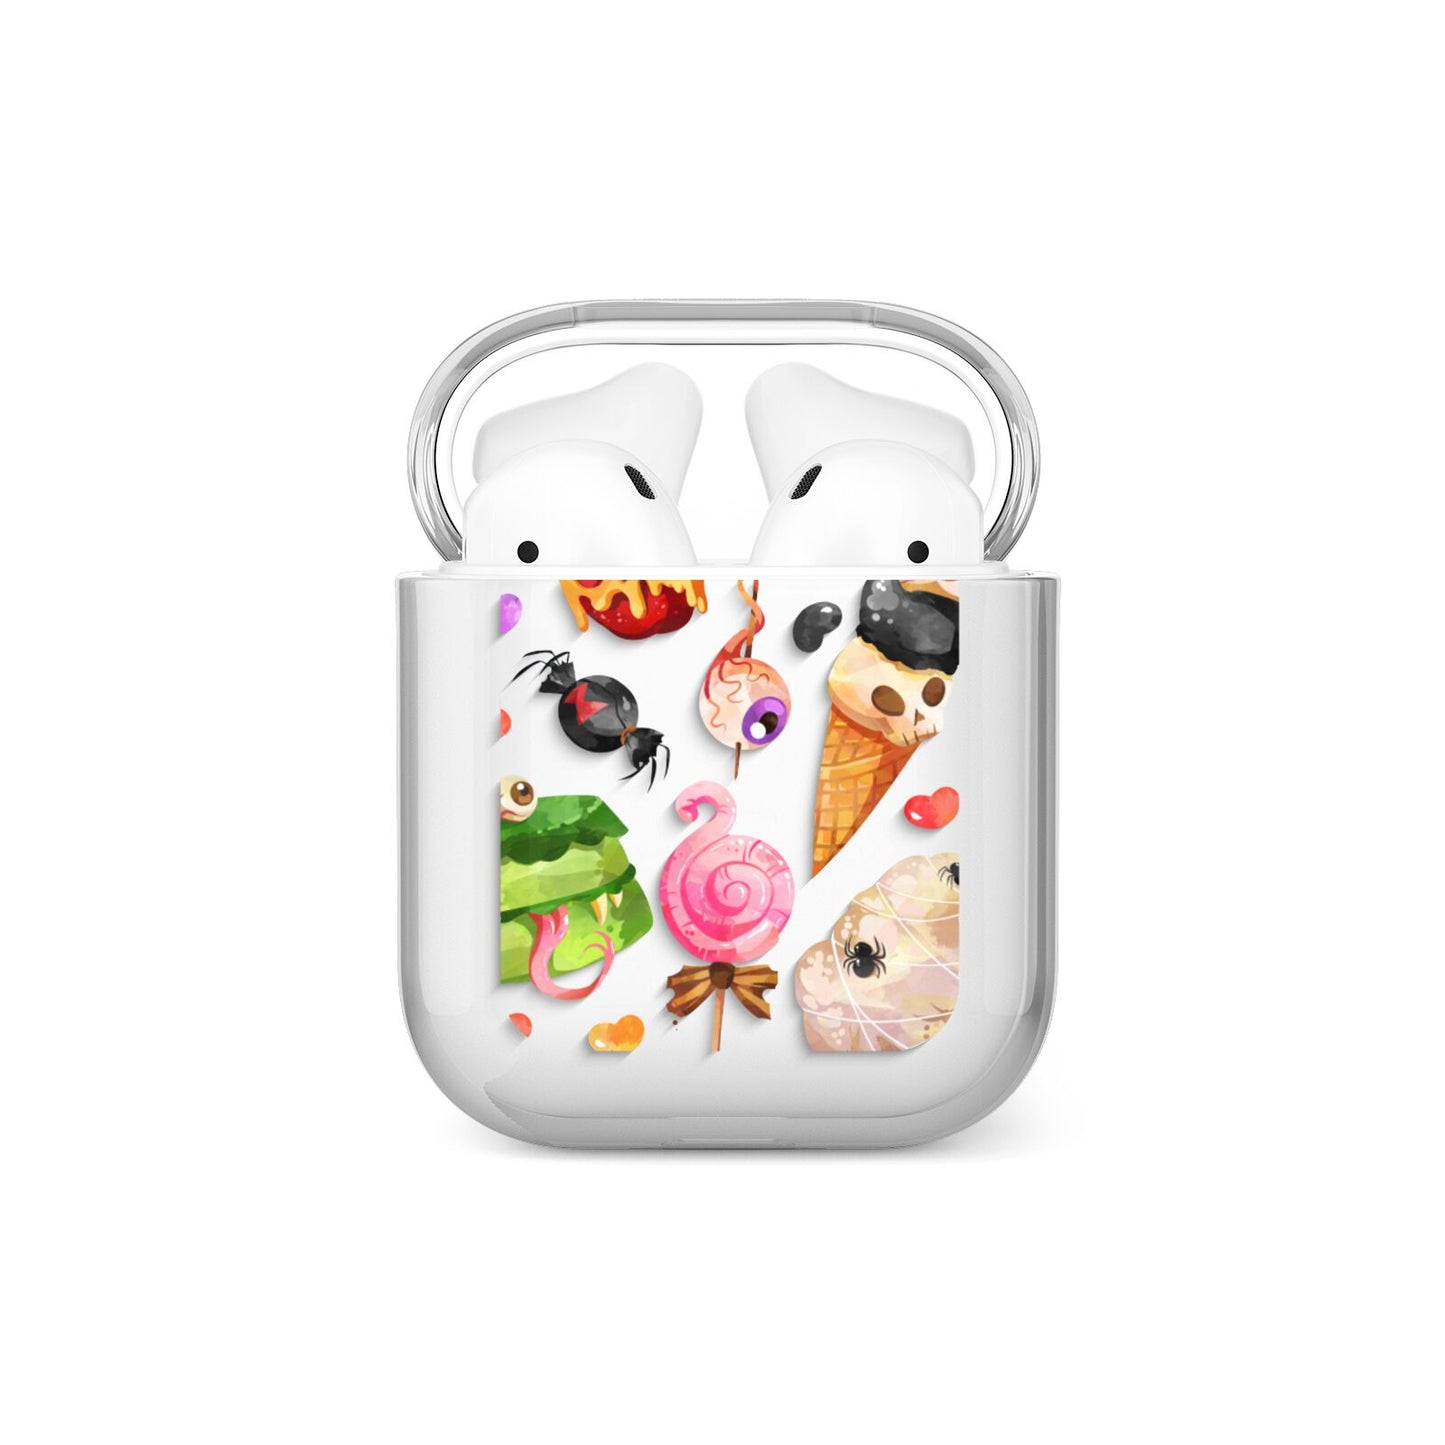 Halloween Cakes and Candy AirPods Case